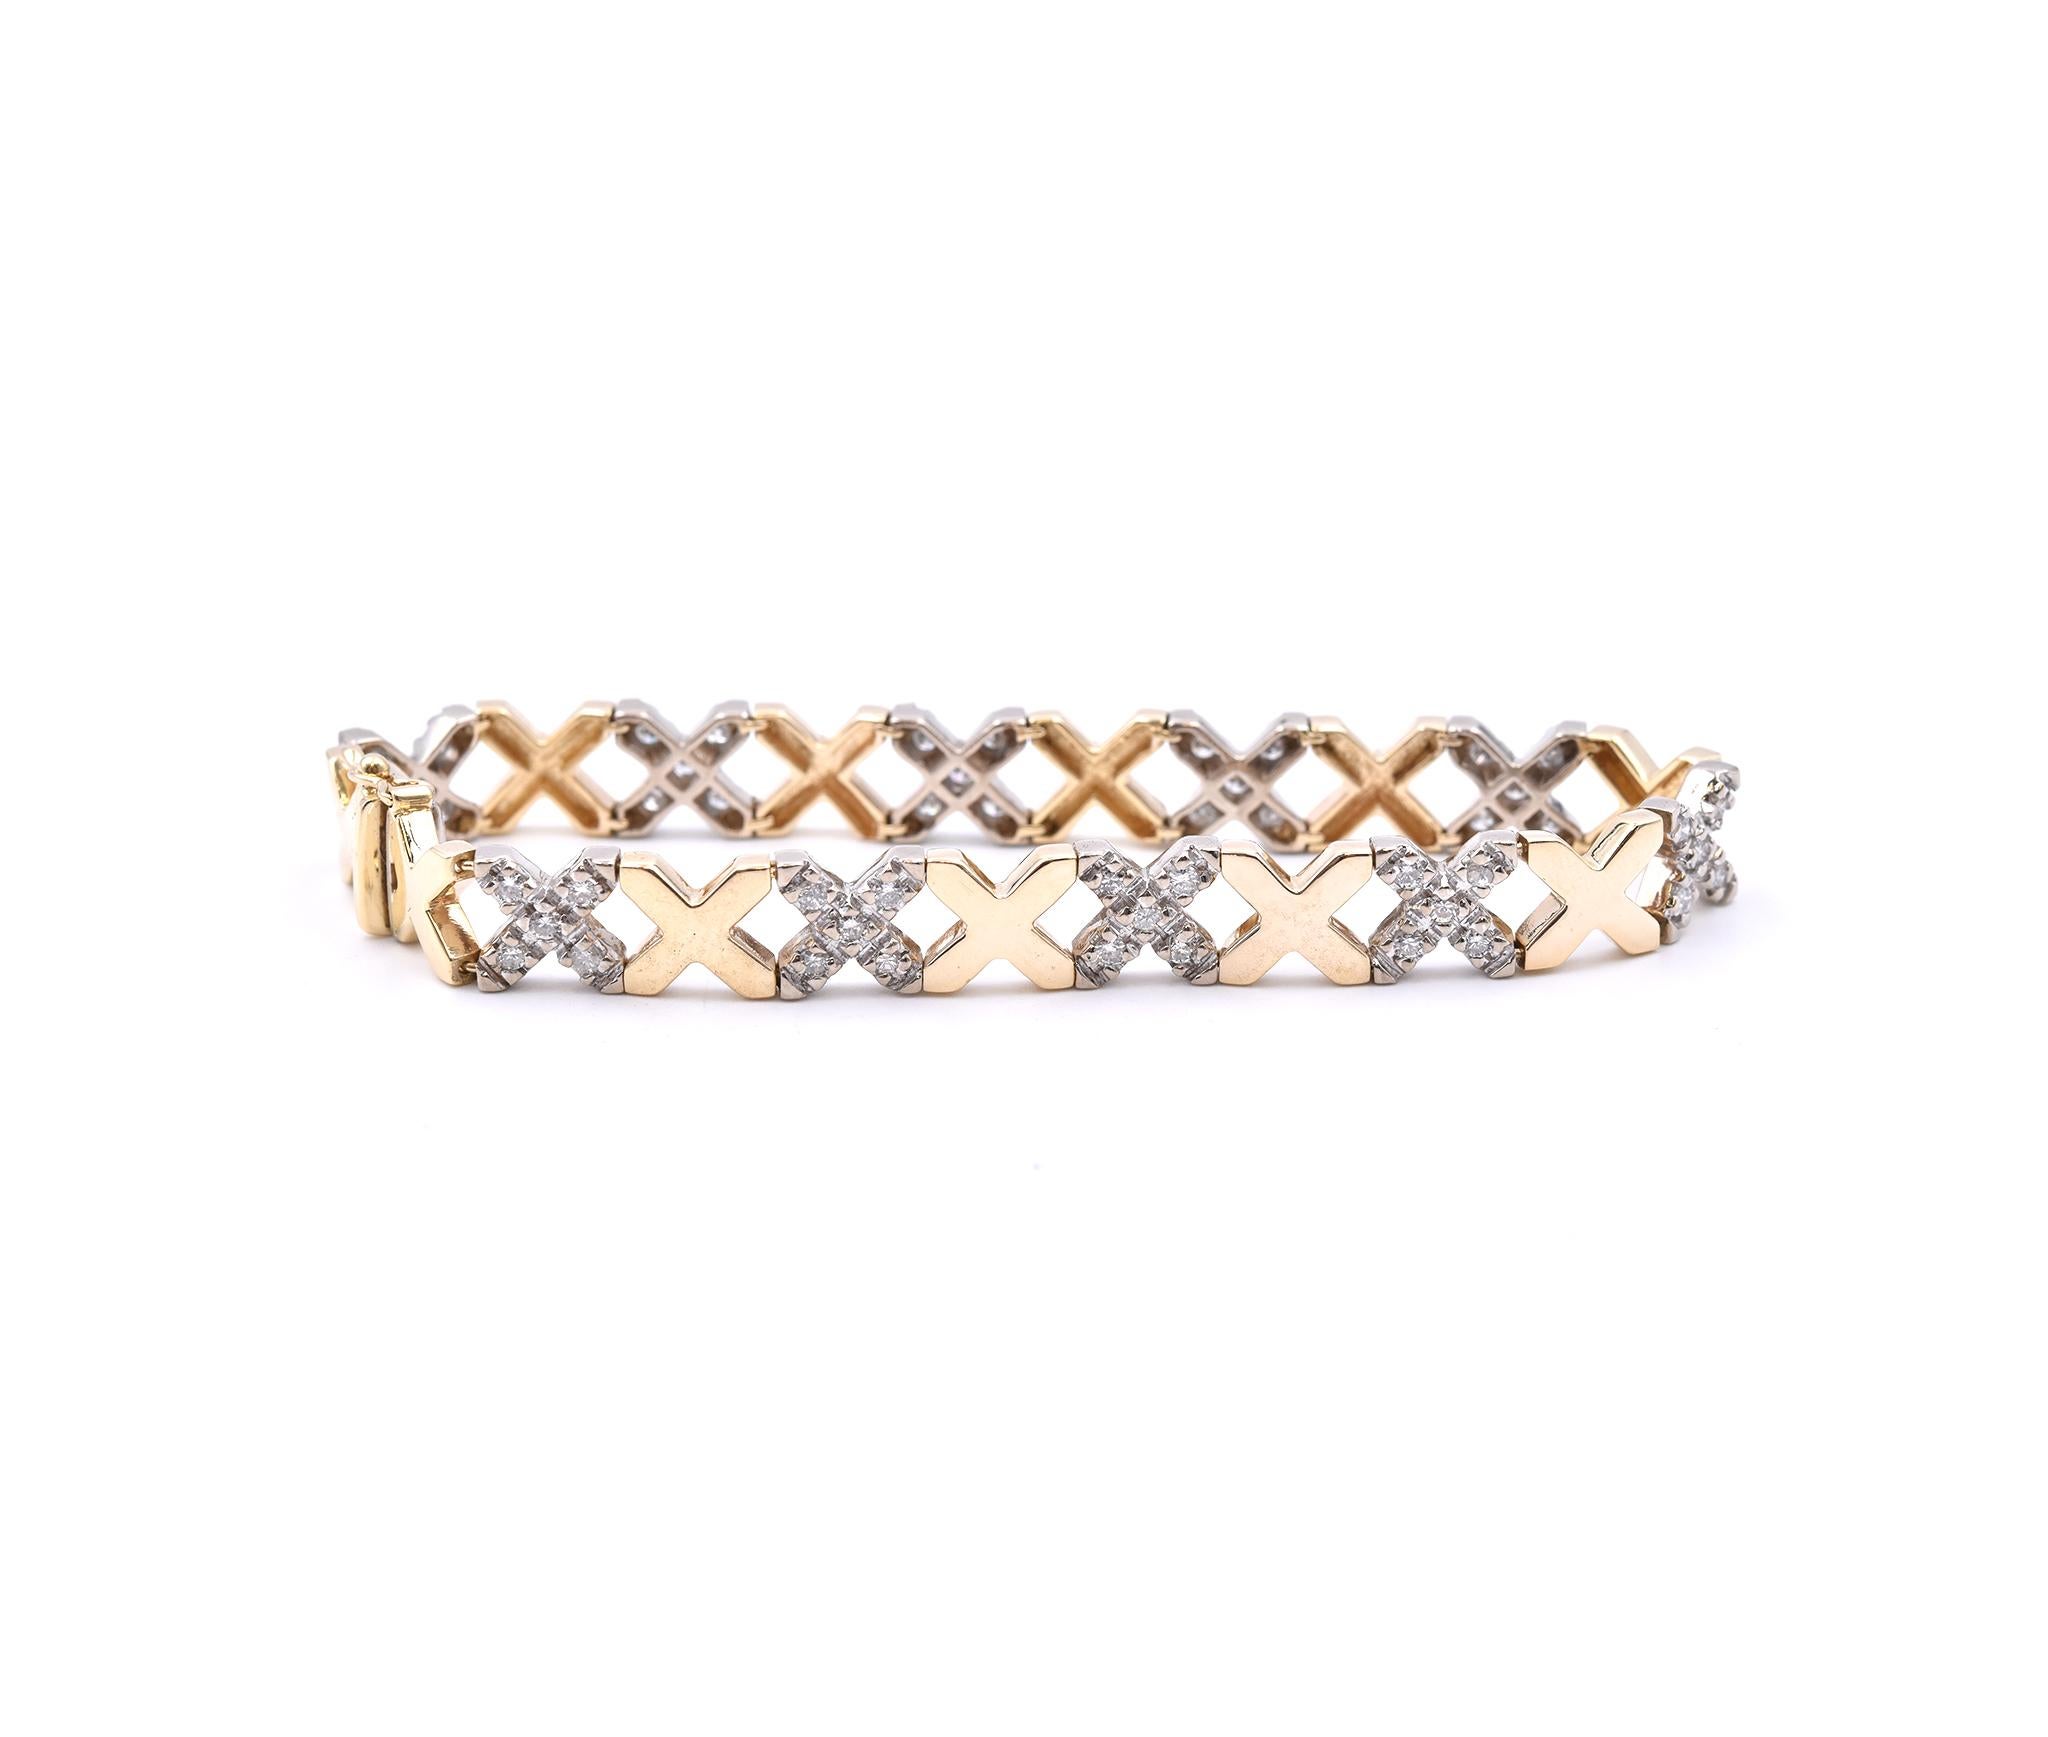 Material: 14K yellow & white gold 
Diamonds: 50 round cut = 1.00cttw
Color: G
Clarity: SI1
Dimensions: bracelet will fit up to a 7-inch wrist
Weight: 21.09 grams